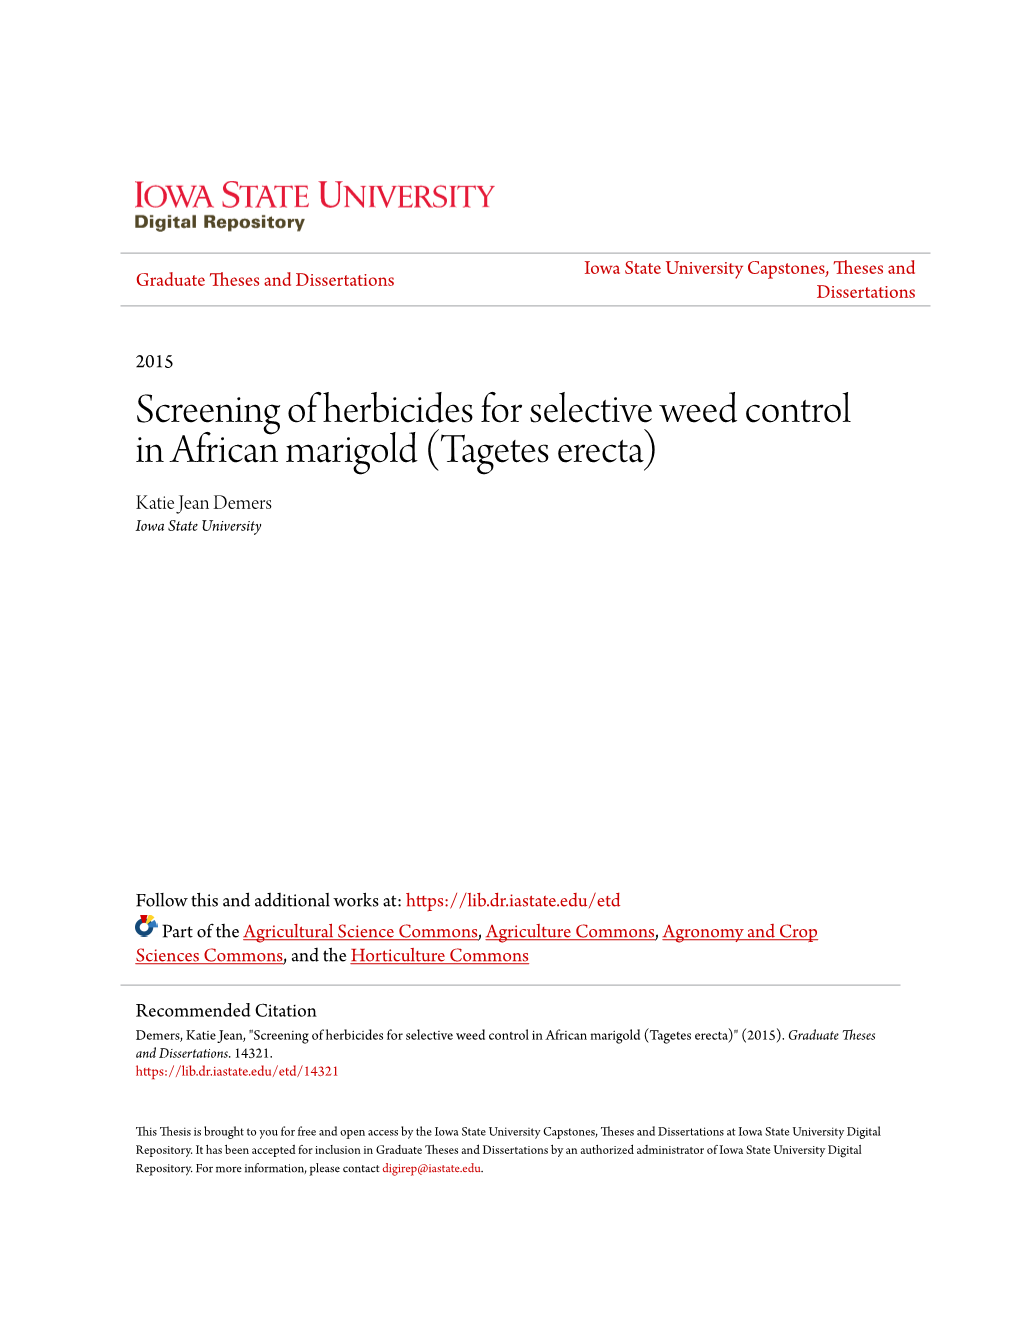 Screening of Herbicides for Selective Weed Control in African Marigold (Tagetes Erecta) Katie Jean Demers Iowa State University